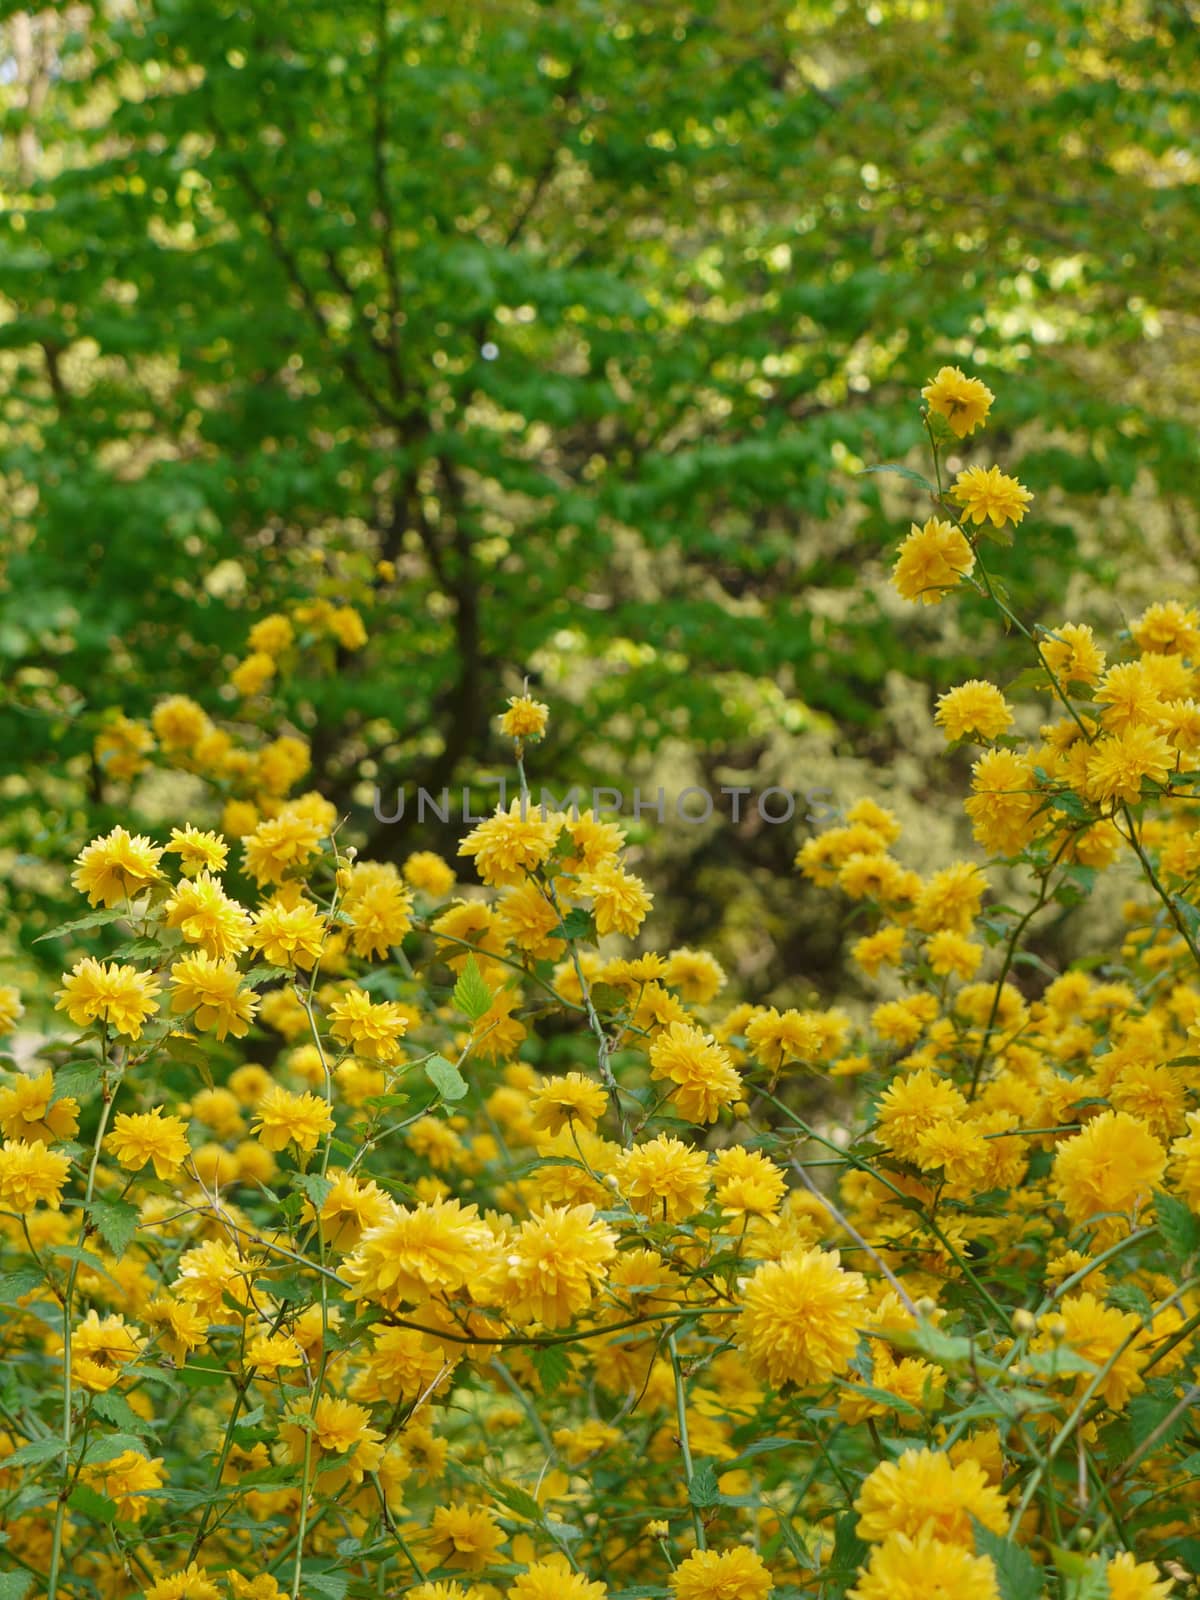 A bush without branches, but with yellow bright flowers and a blurred background by Adamchuk